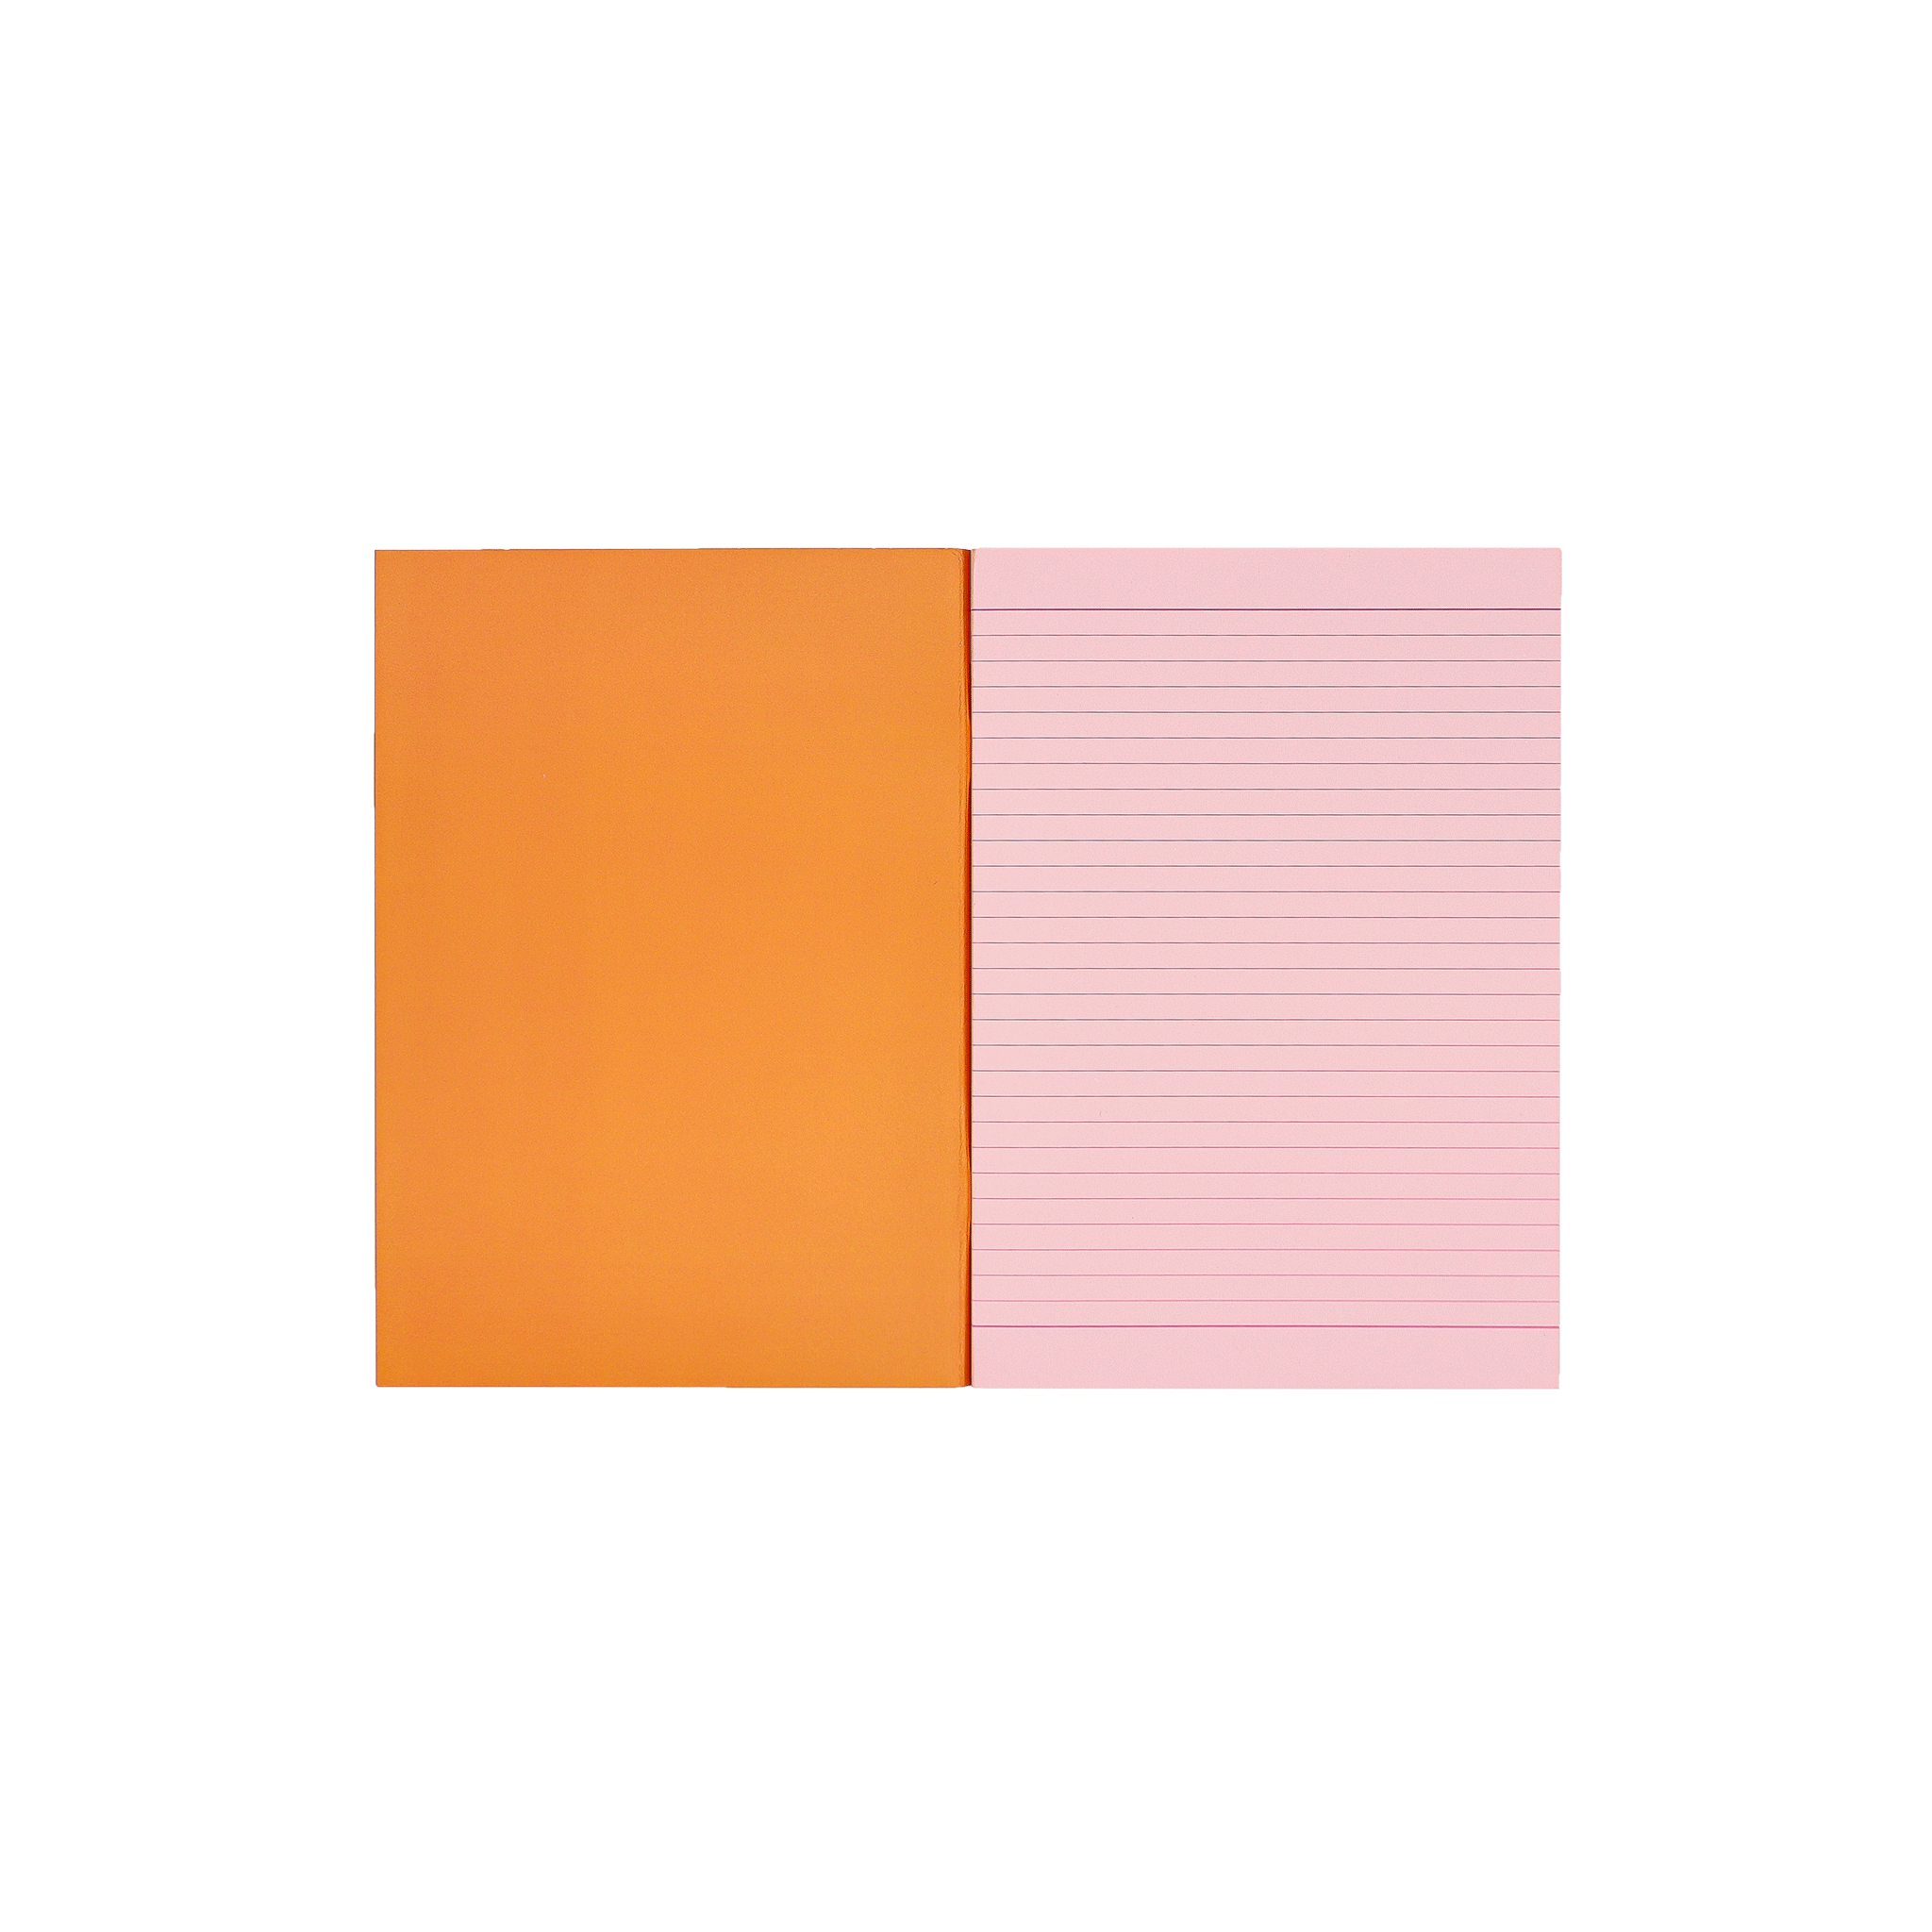 Socolo notebook, open showing its pink paper pages, lined with pink ink, and an orange inner cover.